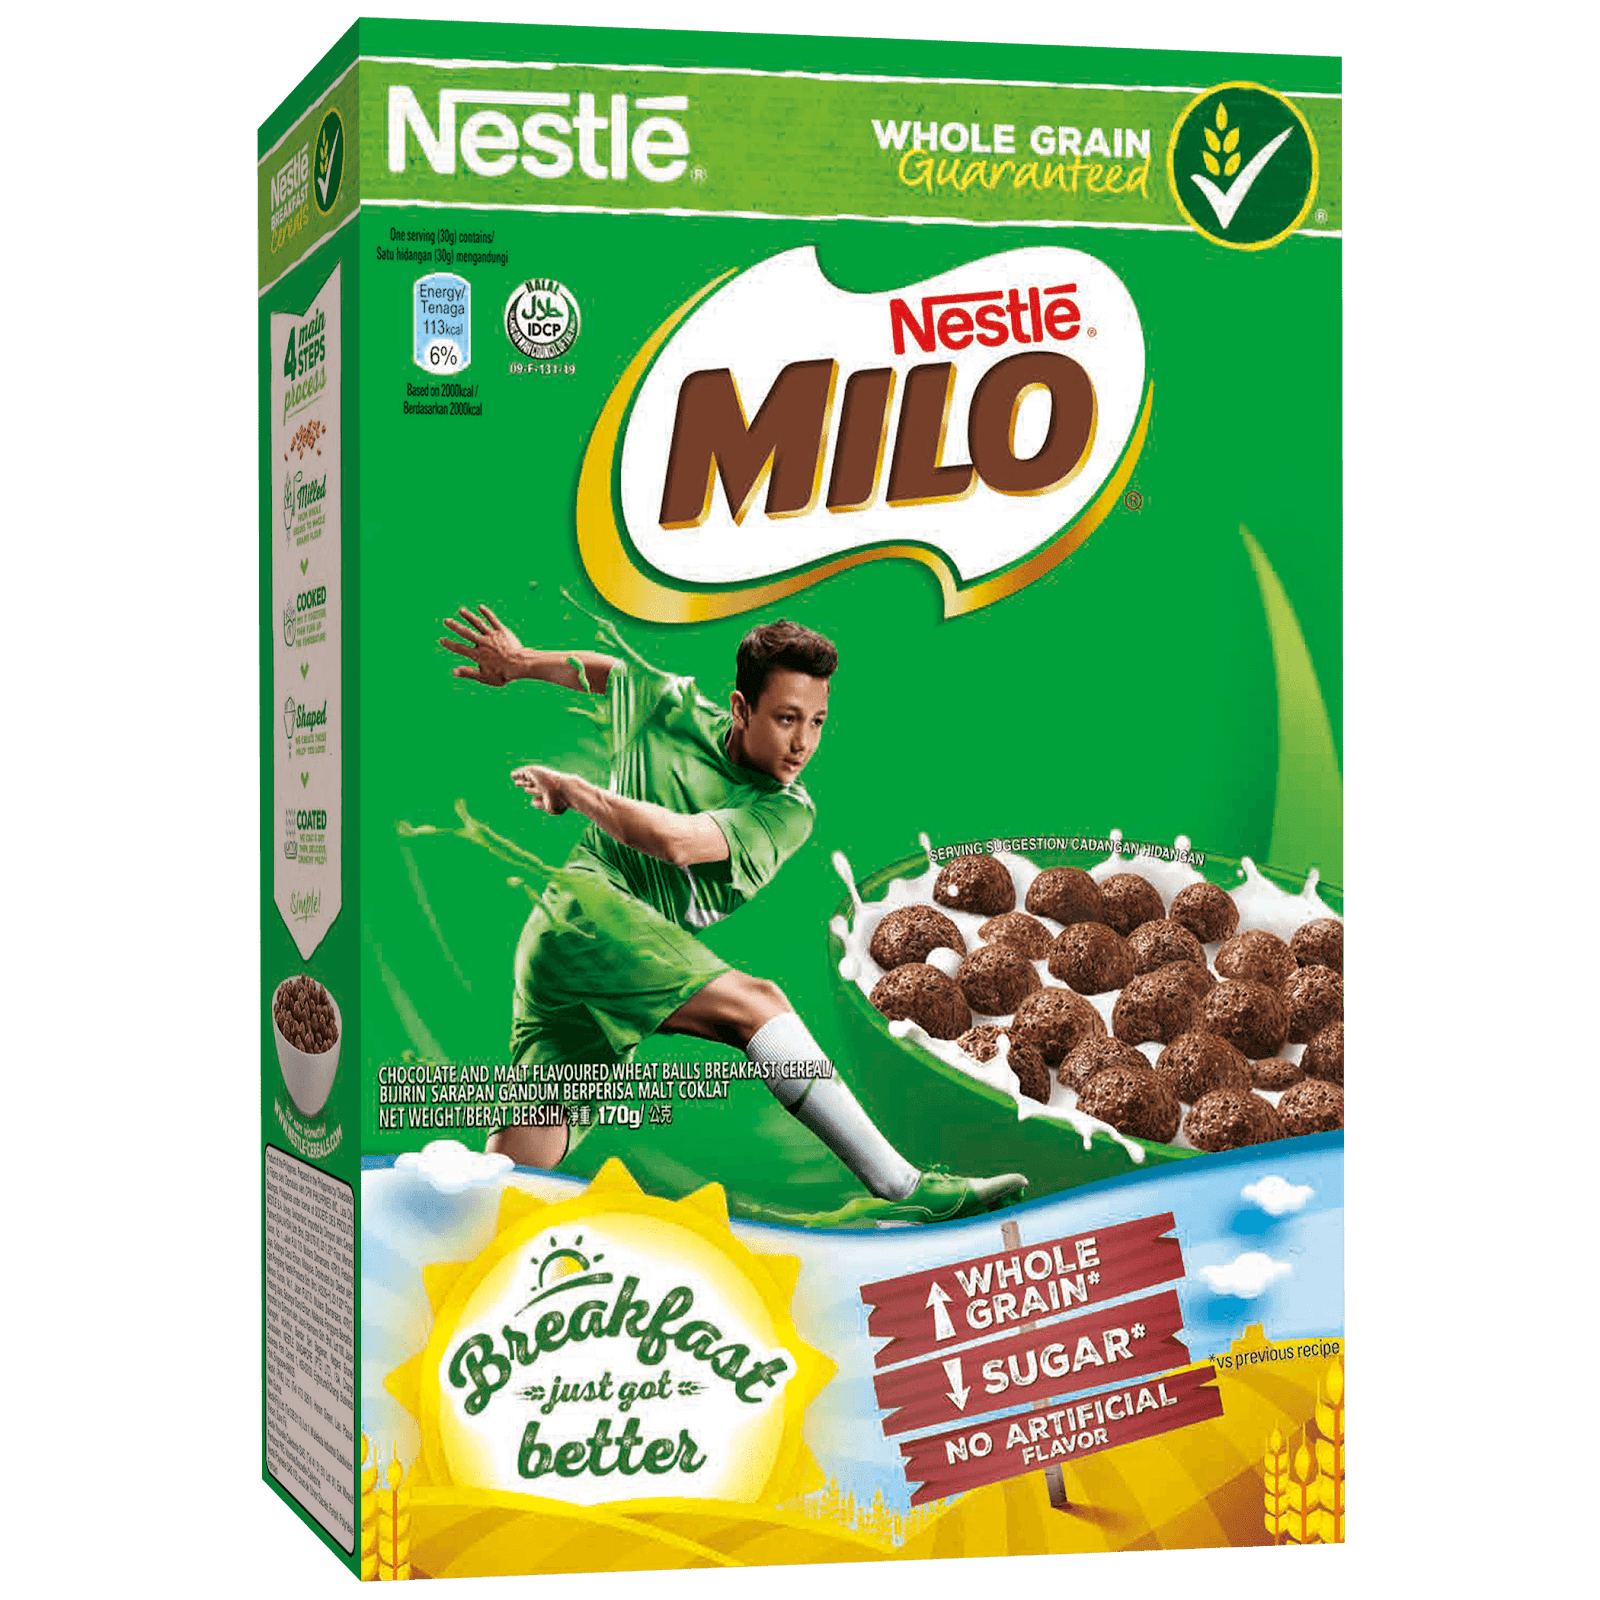 Packaged (past tense): Cereal and Milk Combo Packs